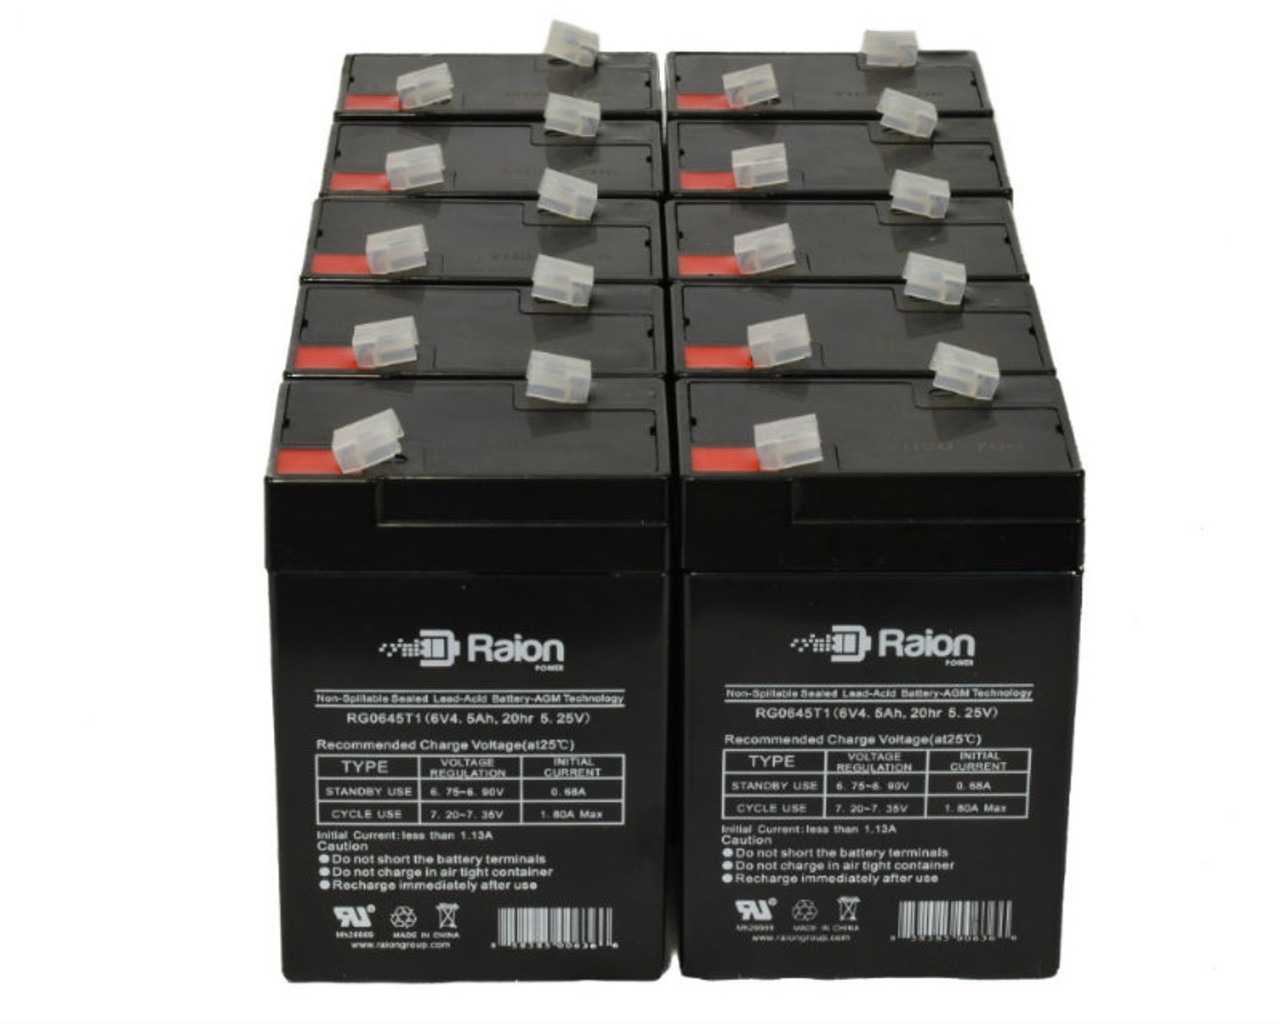 Raion Power 6V 4.5Ah Replacement Emergency Light Battery for Light Alarms 660.0004 - 10 Pack